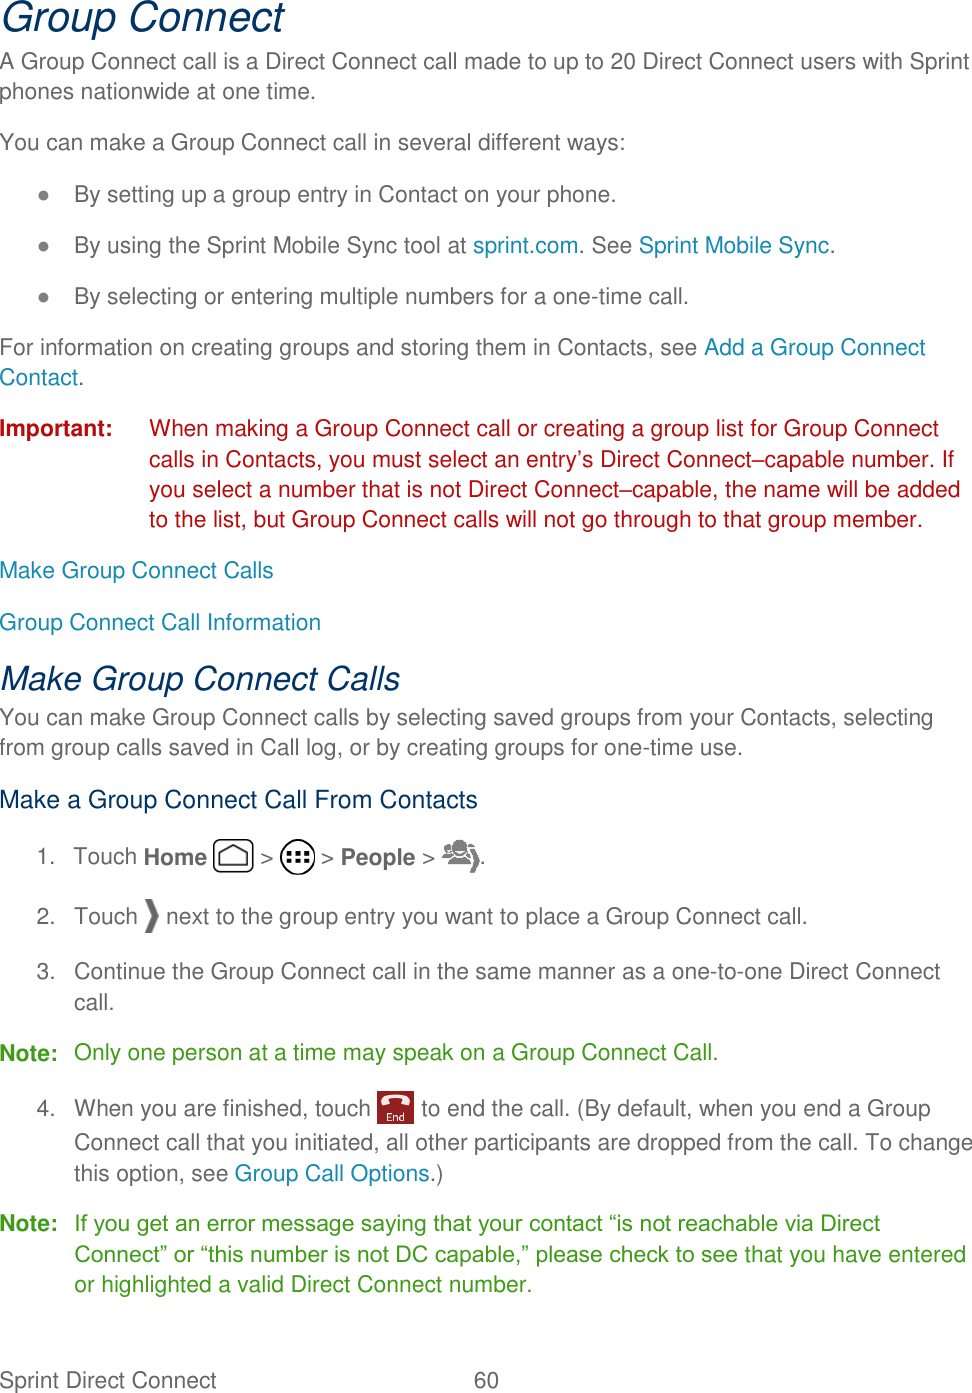 Sprint Direct Connect  60   Group Connect A Group Connect call is a Direct Connect call made to up to 20 Direct Connect users with Sprint phones nationwide at one time. You can make a Group Connect call in several different ways: ● By setting up a group entry in Contact on your phone. ● By using the Sprint Mobile Sync tool at sprint.com. See Sprint Mobile Sync. ● By selecting or entering multiple numbers for a one-time call. For information on creating groups and storing them in Contacts, see Add a Group Connect Contact. Important:  When making a Group Connect call or creating a group list for Group Connect calls in Contacts, you must select an entry’s Direct Connect–capable number. If you select a number that is not Direct Connect–capable, the name will be added to the list, but Group Connect calls will not go through to that group member. Make Group Connect Calls Group Connect Call Information Make Group Connect Calls You can make Group Connect calls by selecting saved groups from your Contacts, selecting from group calls saved in Call log, or by creating groups for one-time use. Make a Group Connect Call From Contacts 1.  Touch Home   &gt;   &gt; People &gt;  . 2.  Touch   next to the group entry you want to place a Group Connect call. 3.  Continue the Group Connect call in the same manner as a one-to-one Direct Connect call. Note:  Only one person at a time may speak on a Group Connect Call. 4.  When you are finished, touch   to end the call. (By default, when you end a Group Connect call that you initiated, all other participants are dropped from the call. To change this option, see Group Call Options.) Note: If you get an error message saying that your contact “is not reachable via Direct Connect” or “this number is not DC capable,” please check to see that you have entered or highlighted a valid Direct Connect number. 